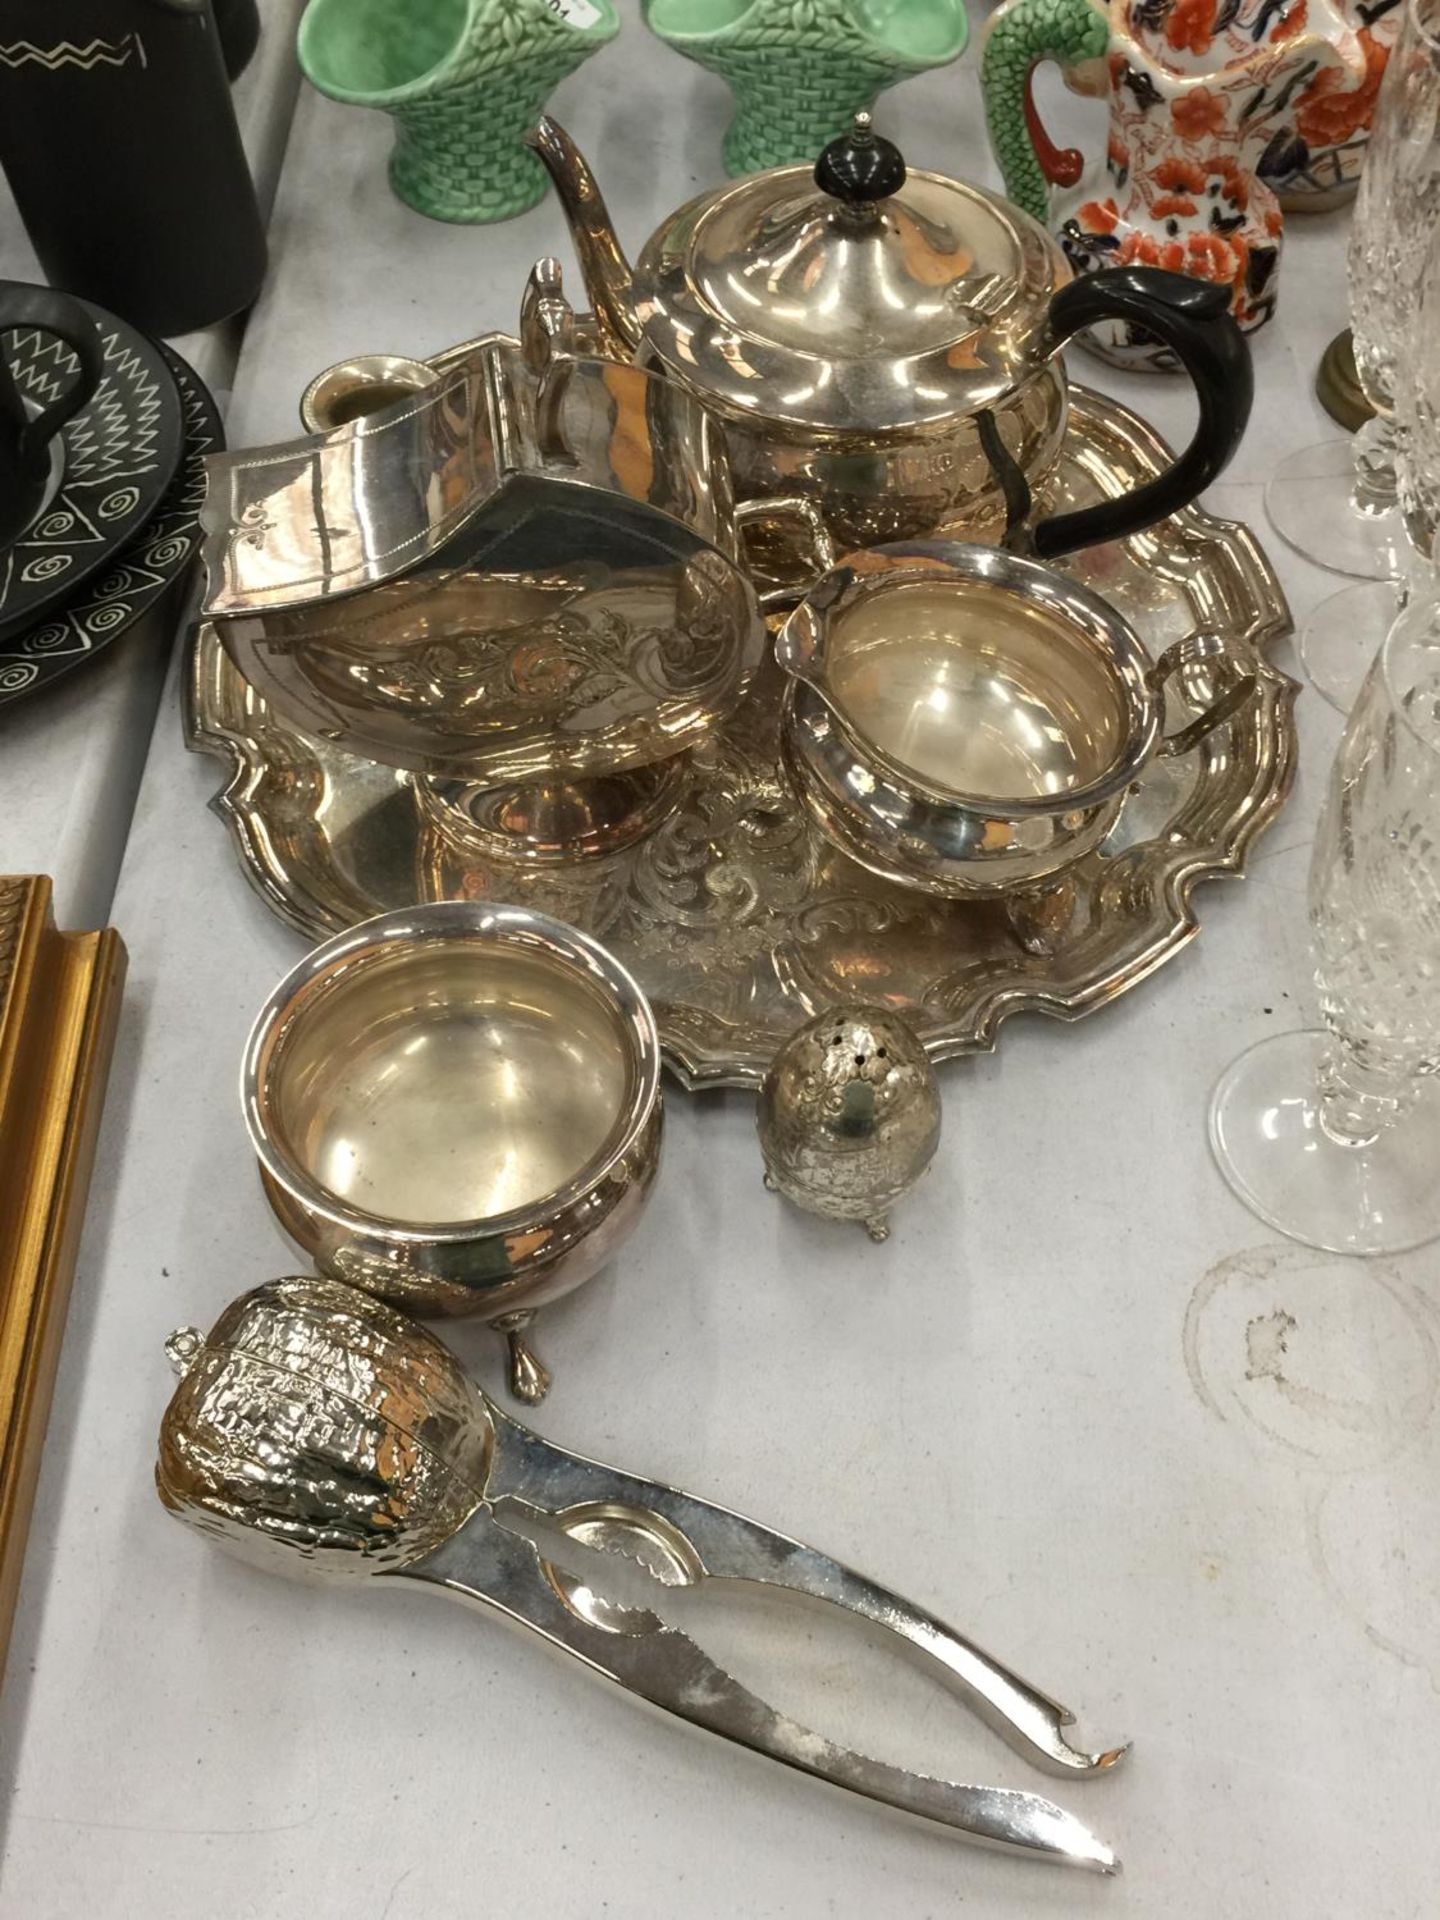 A QUANTITY OF SILVER PLATE TO INCLUDE A TRAY WITH A TEAPOT, SUGAR BOWL, CREAM JUG, ETC